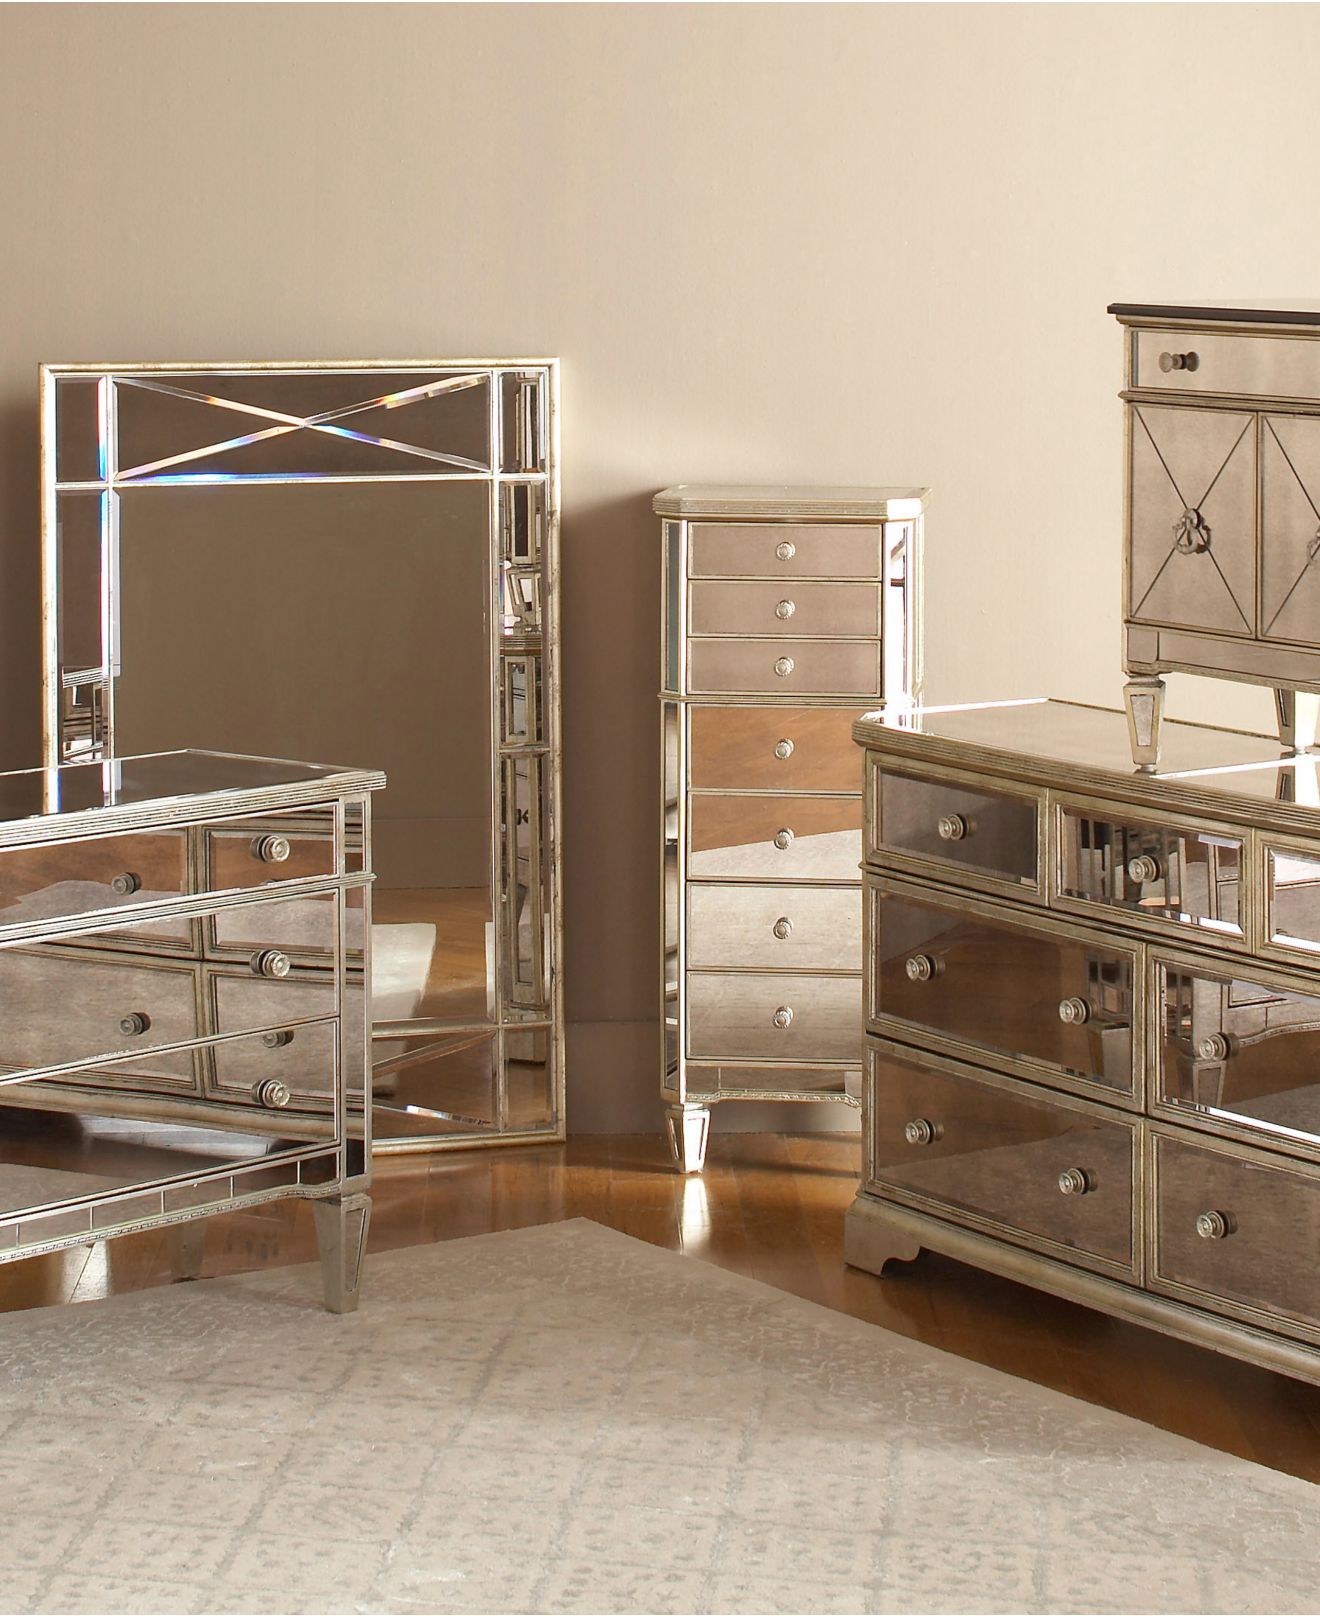 Mirrored bedroom furniture sets in home
design trends